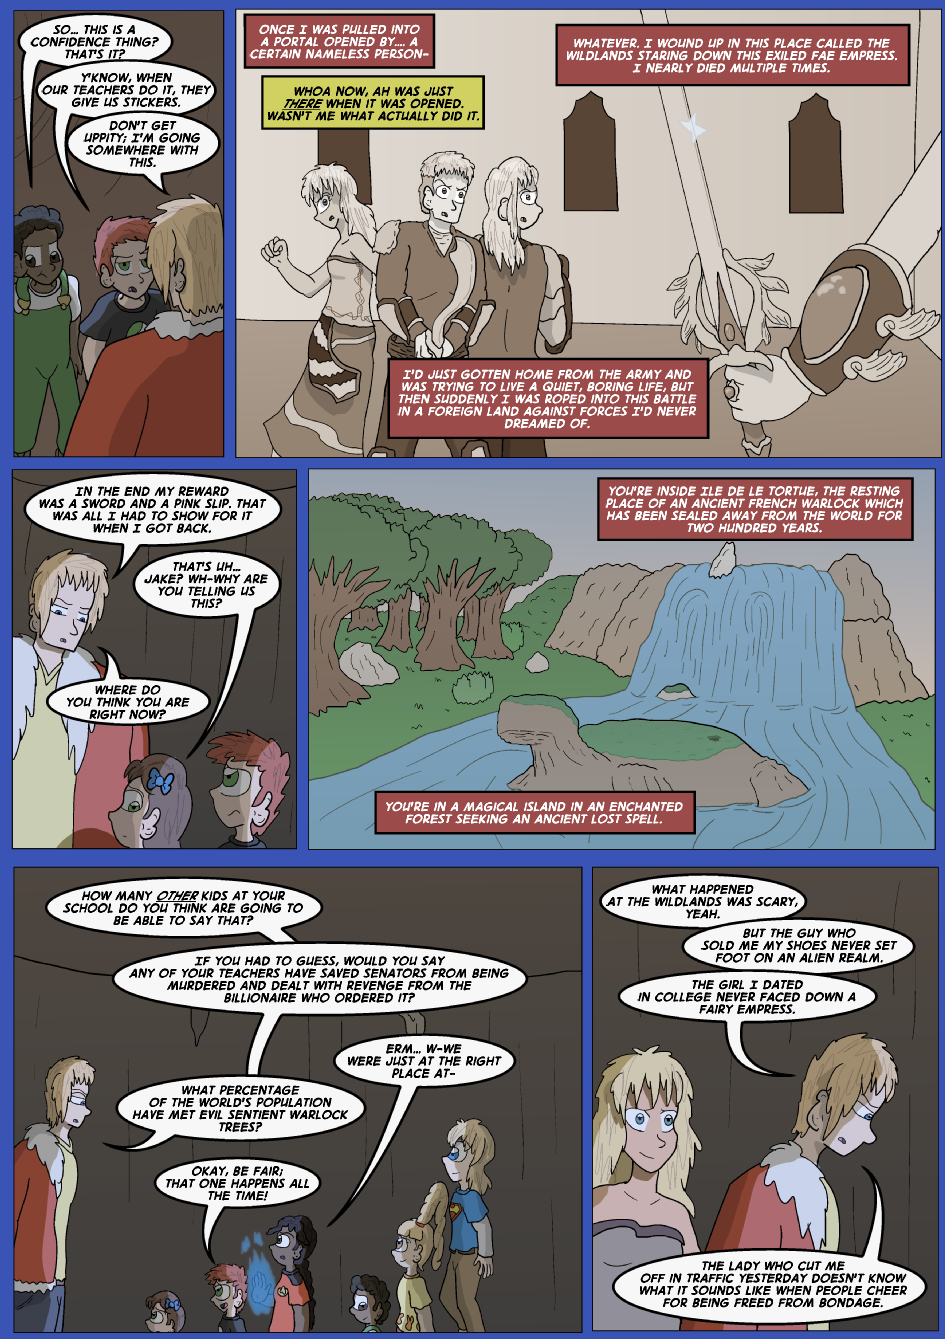 The Lost Spell of Baron Fontainebleu, Page 23